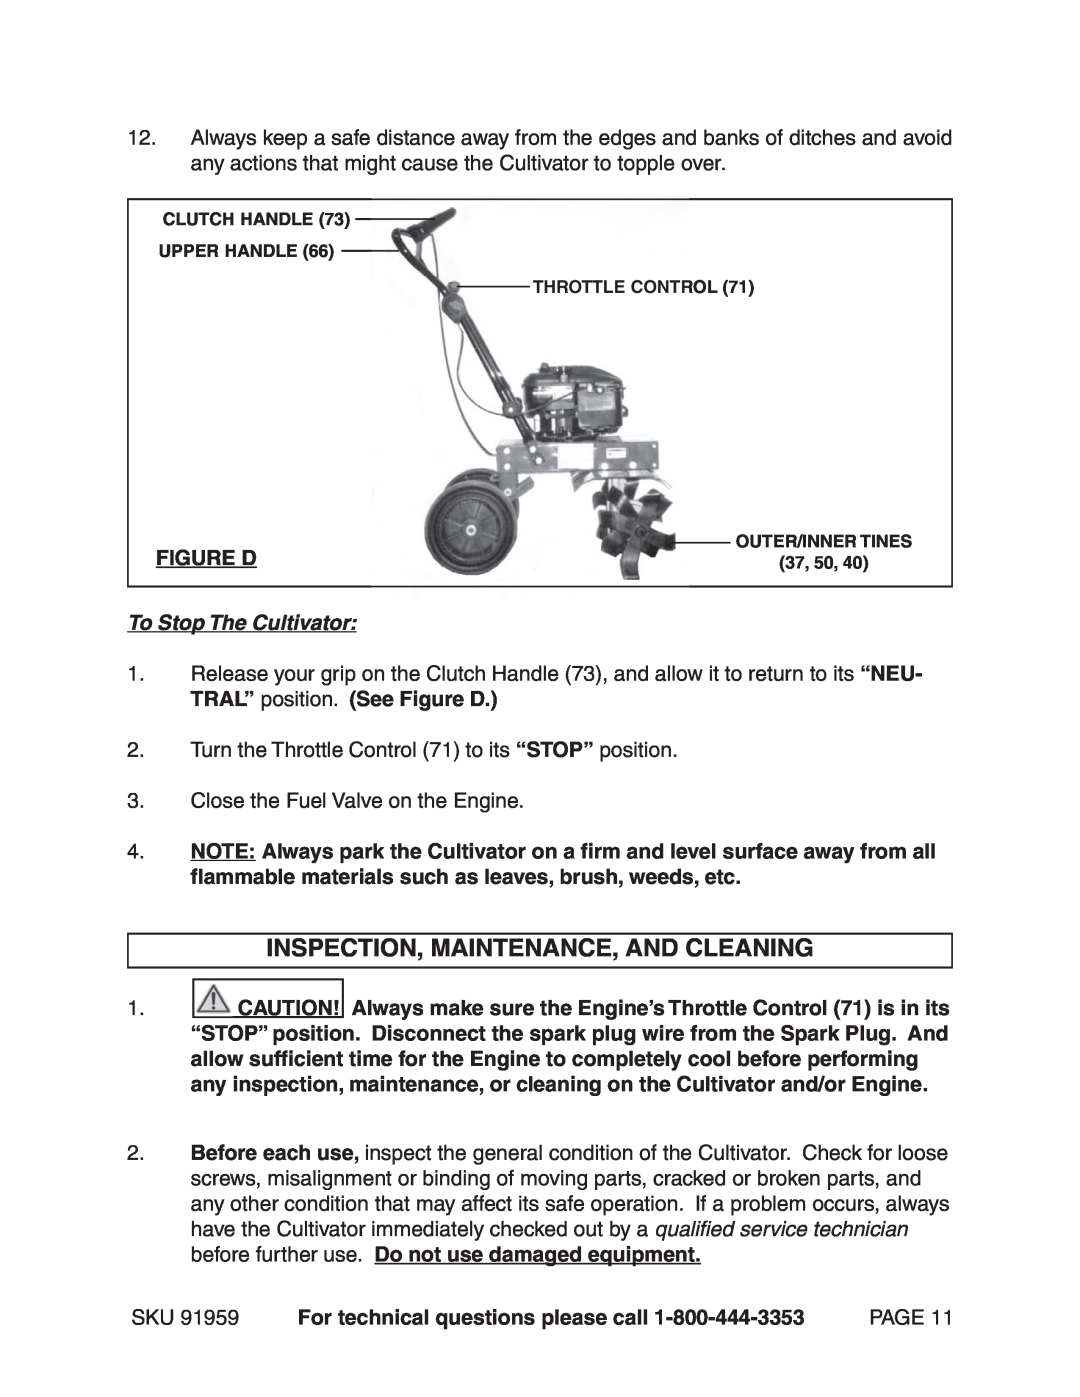 Harbor Freight Tools 91959 manual Inspection, Maintenance, And Cleaning, To Stop The Cultivator 